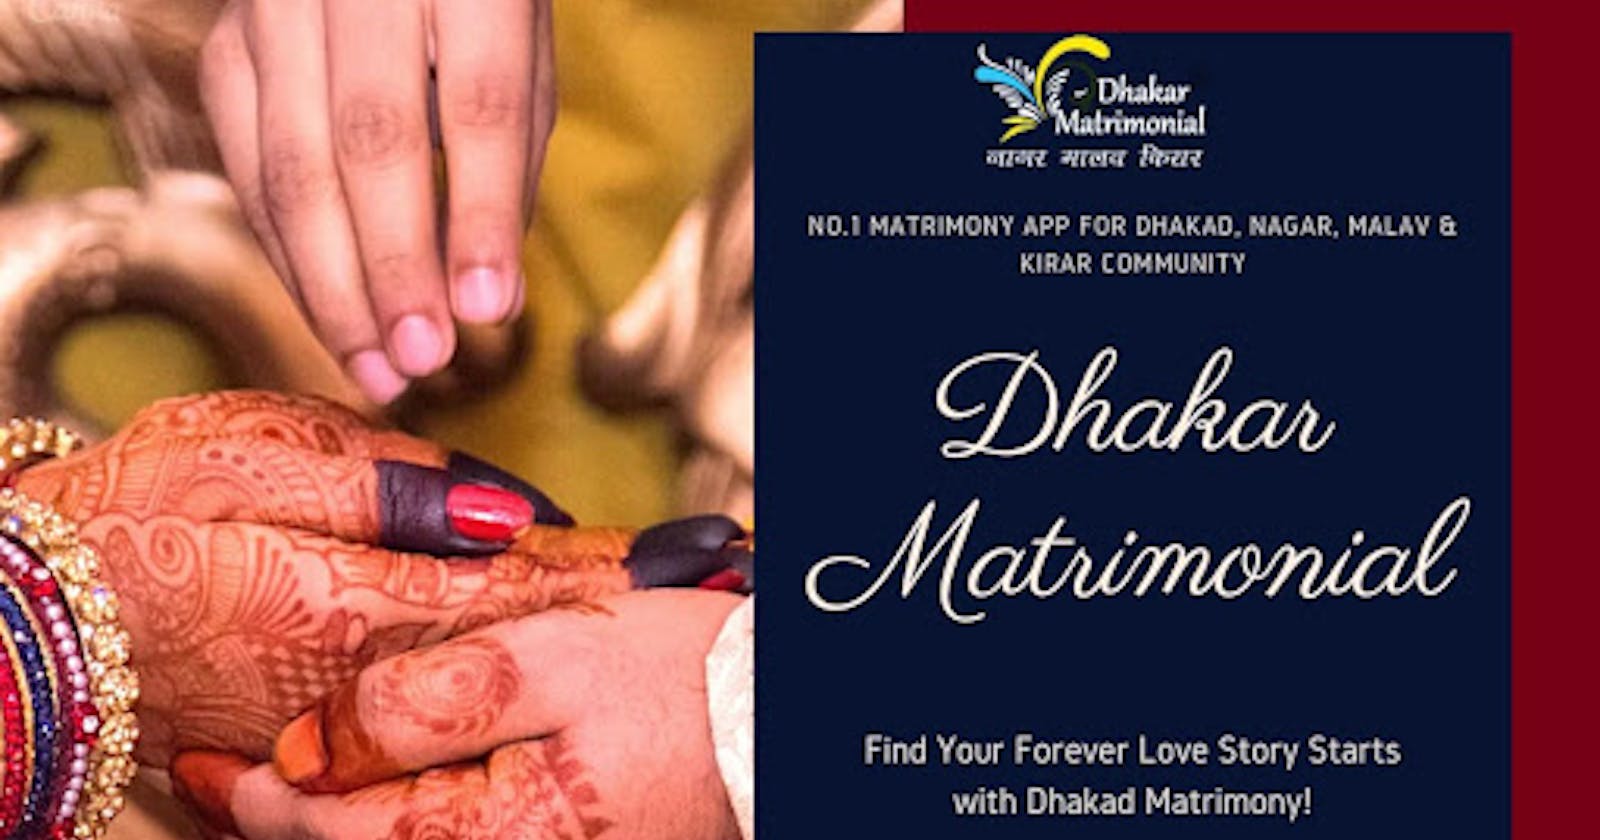 Find Your Forever Love Story Starts with Dhakad Matrimony!